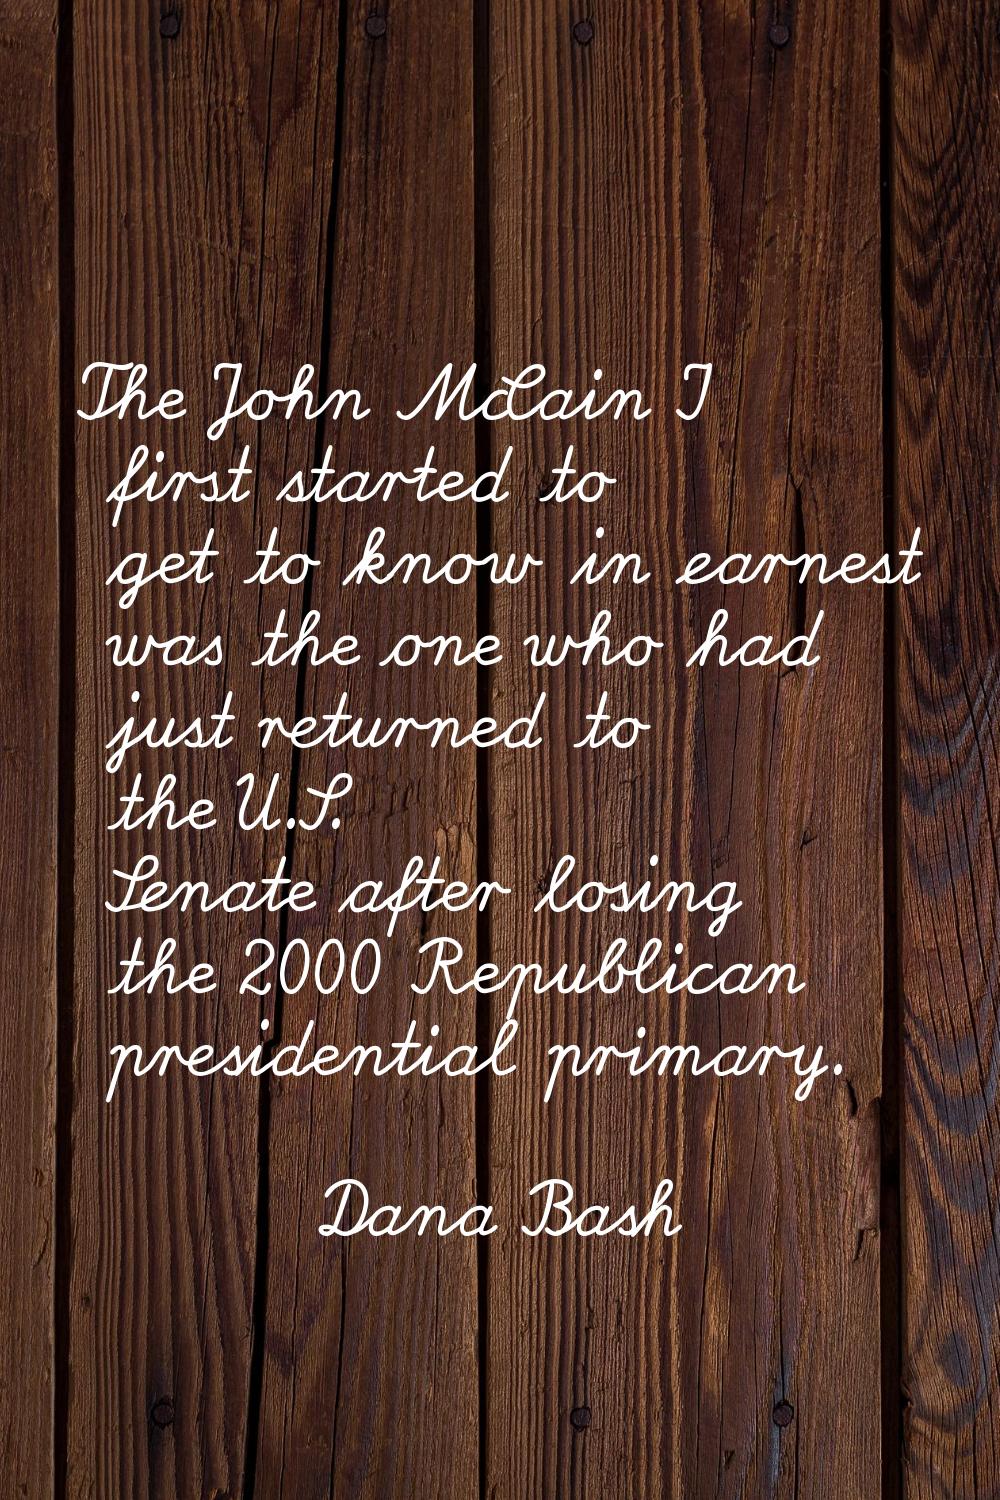 The John McCain I first started to get to know in earnest was the one who had just returned to the 